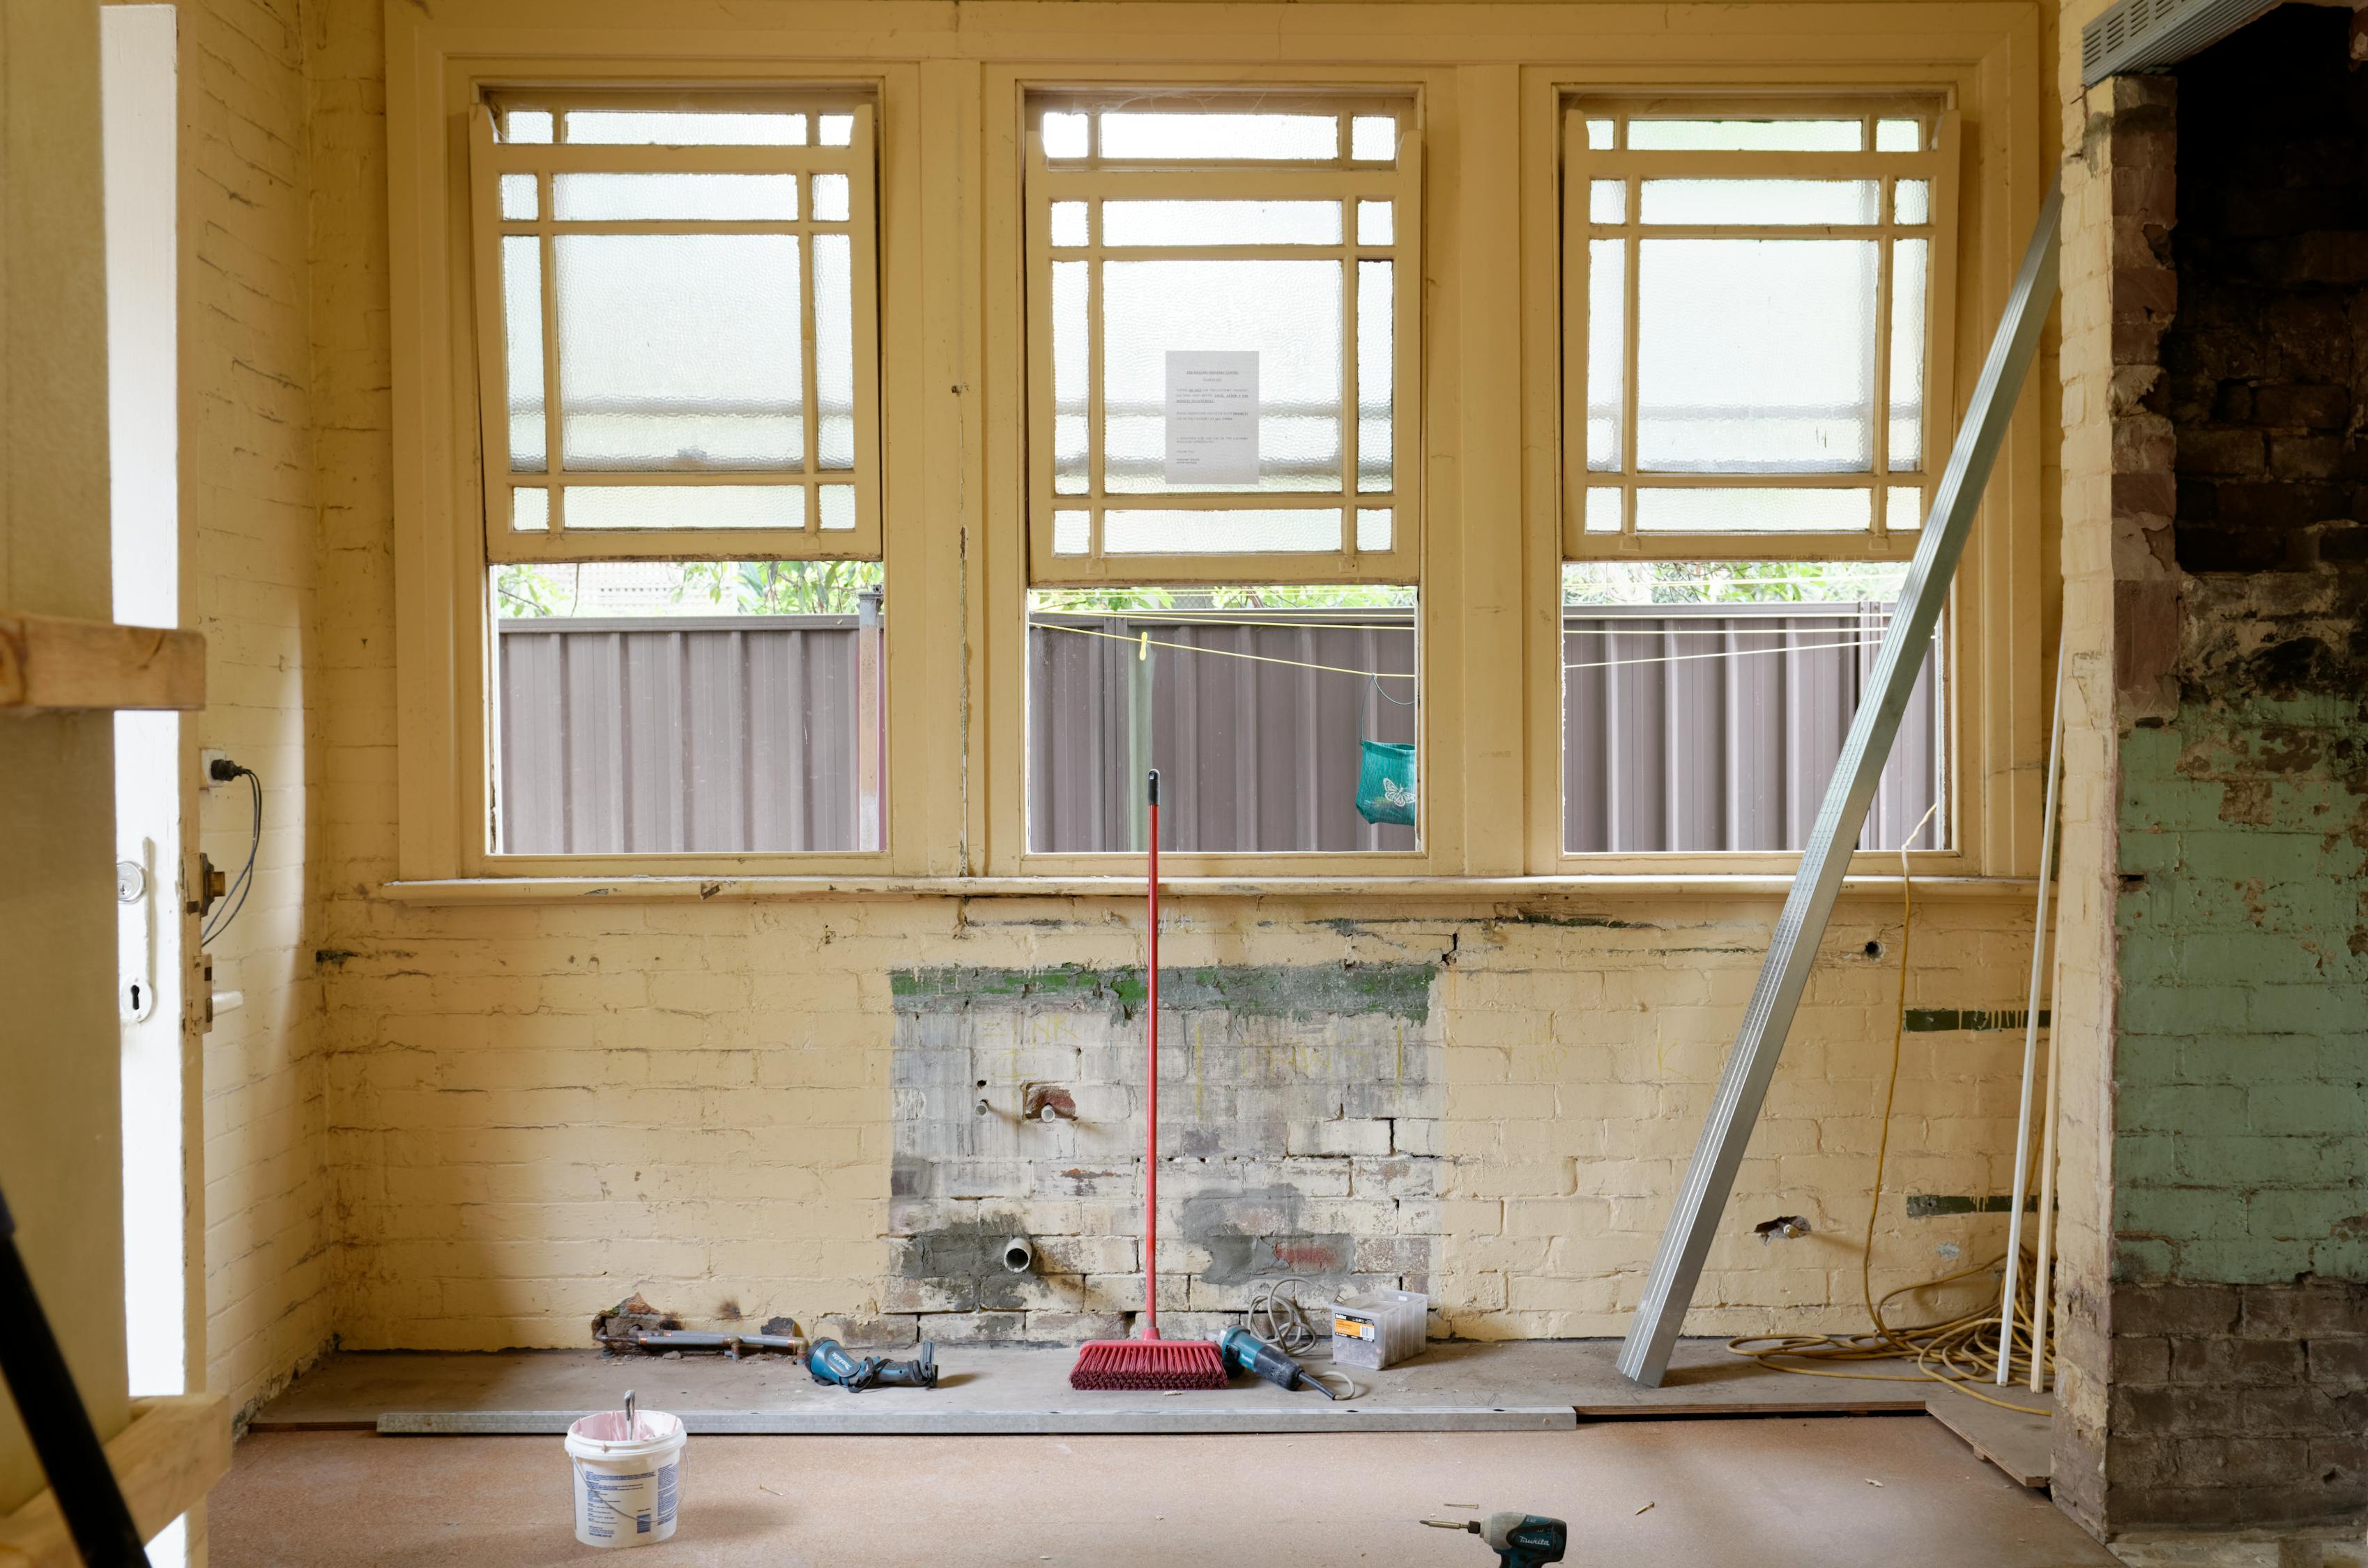 Interior wall of an apartment undergoing renovations that has been stripped down to the brick; a broom and other construction tools sit beneath open windows.